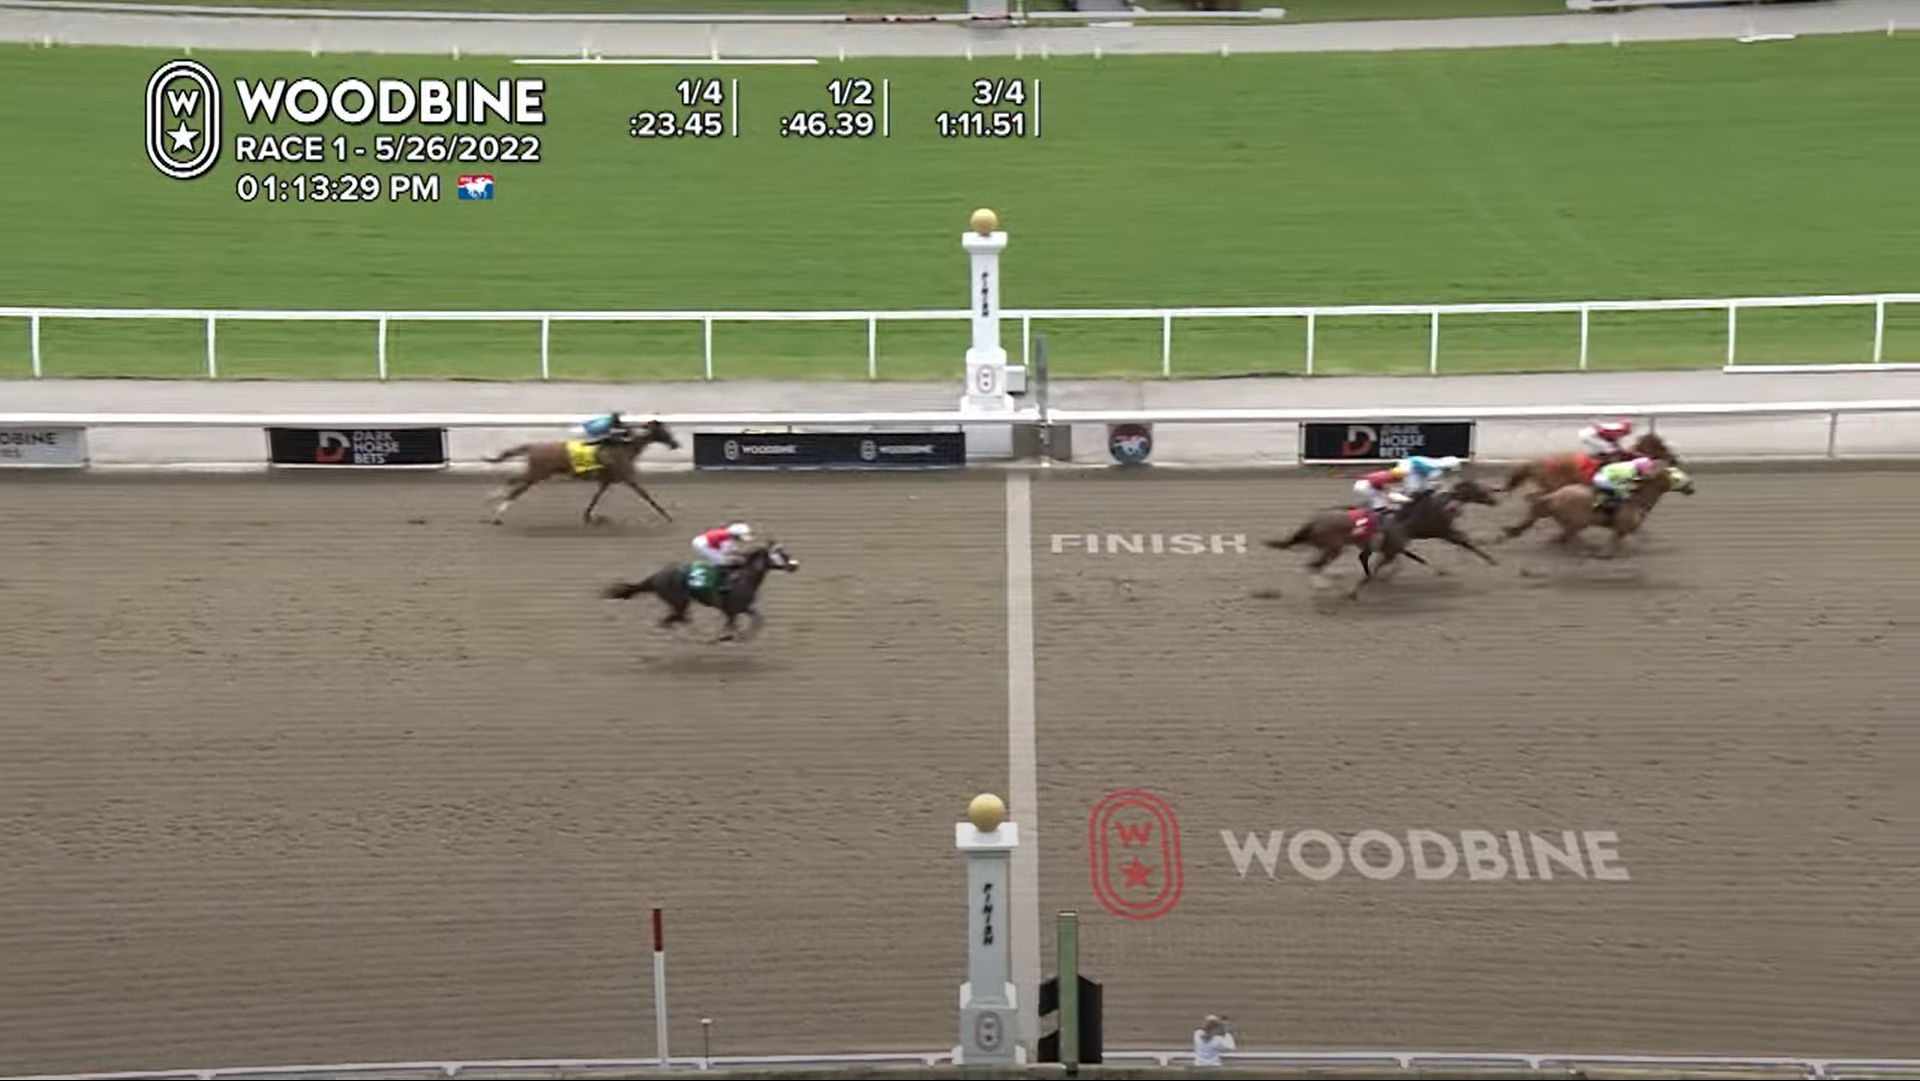 Woodbine Entertainment – On air with Tactic Live for world-class horse racing coverage